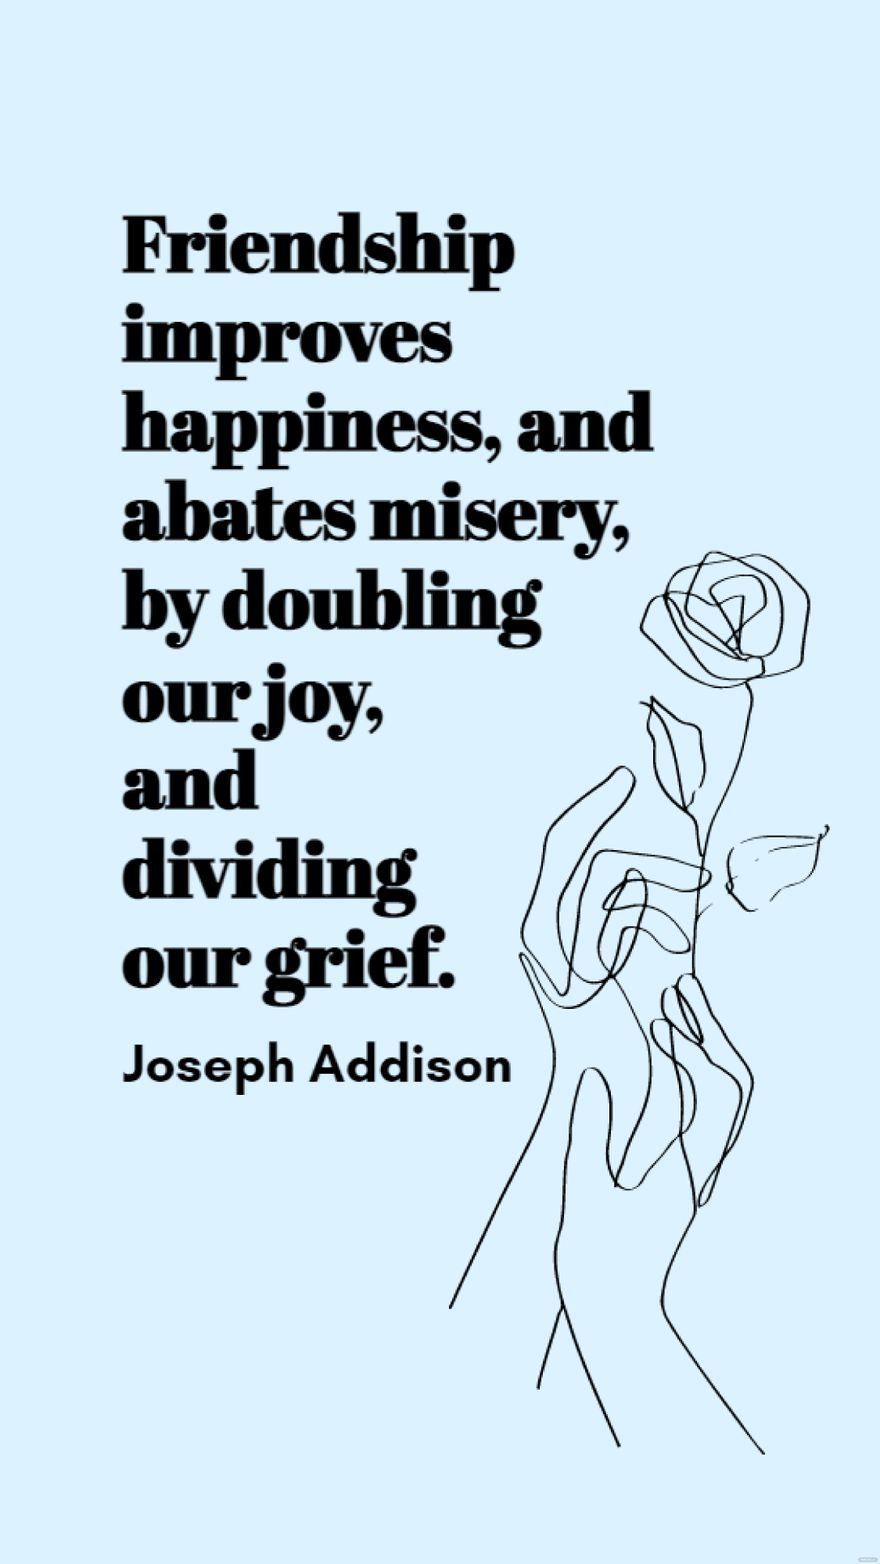 Free Joseph Addison - Friendship improves happiness, and abates misery, by doubling our joy, and dividing our grief. in JPG